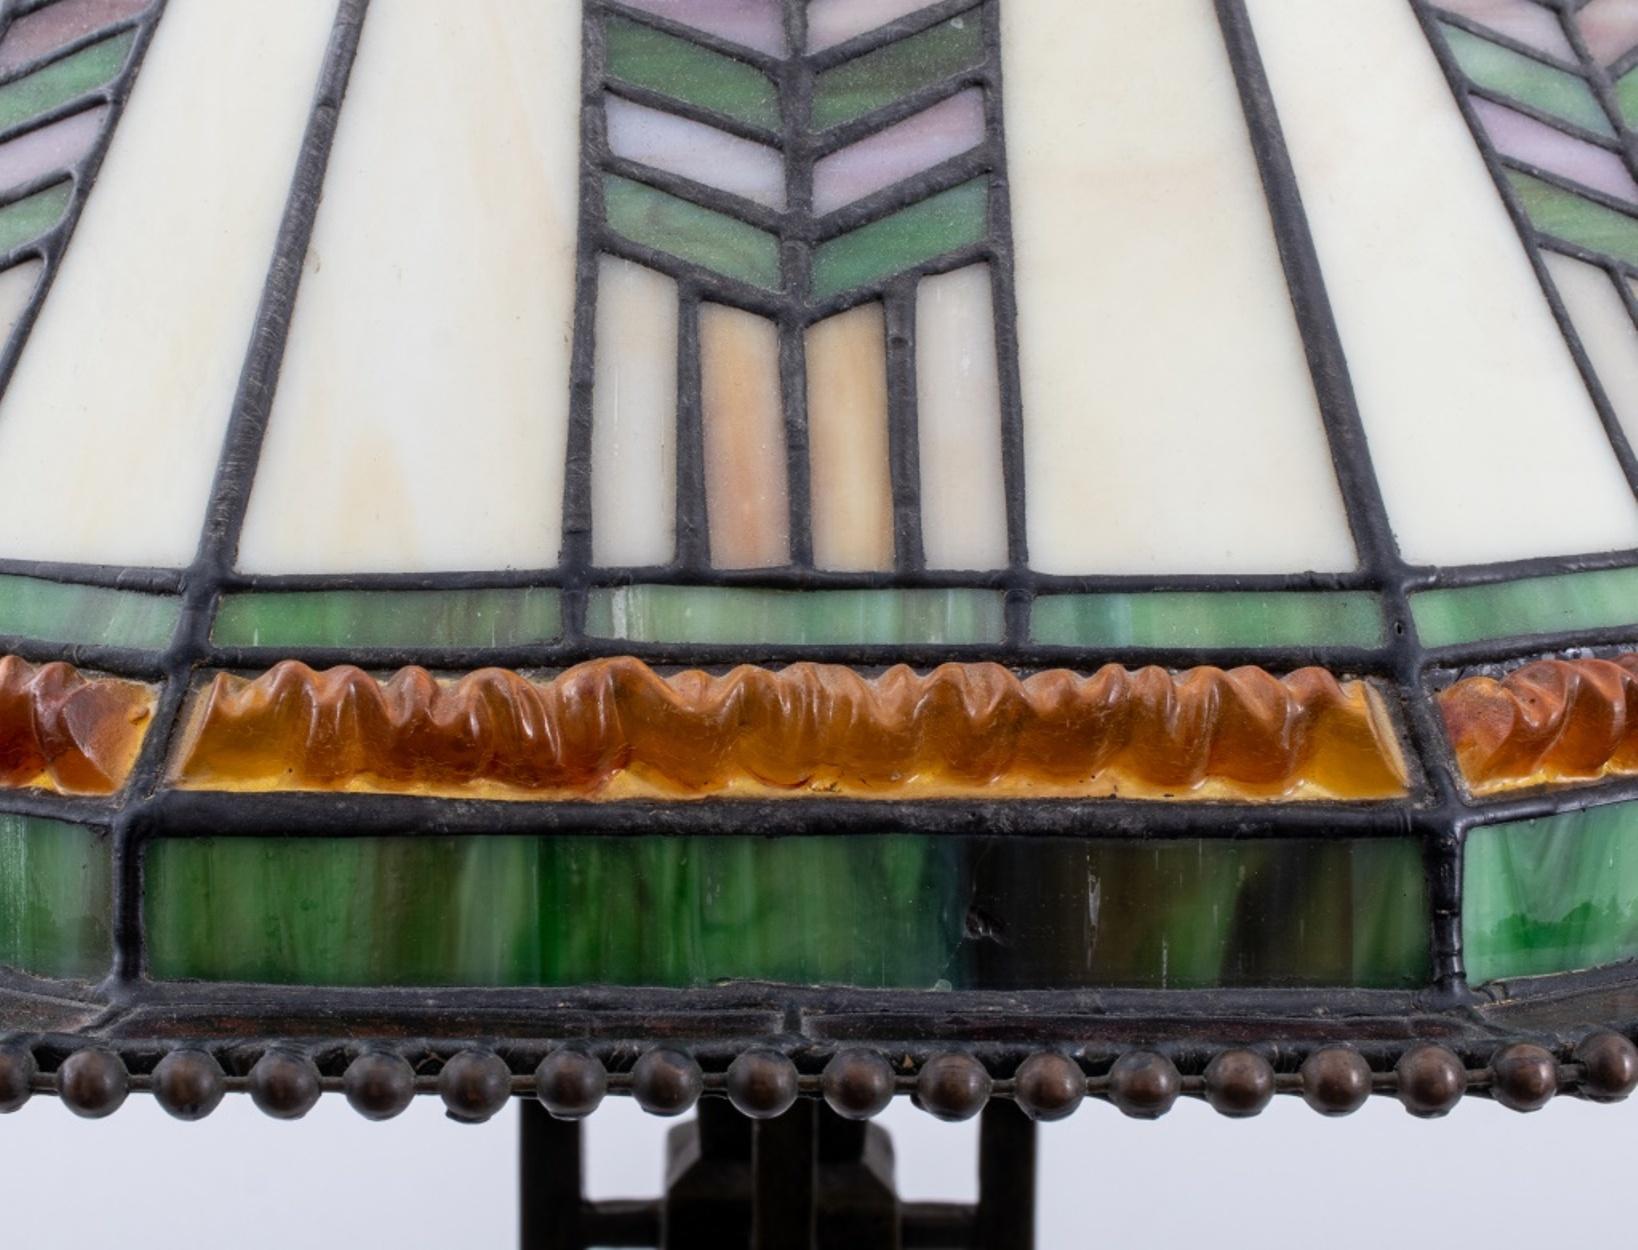 Tiffany manner slag glass table lamp, the shade with orange, purple, and green geometric design, the bronzed composite base with Prairie style geometric buttresses in the manner of Frank Lloyd Wright (American, 1867-1959).

Dimensions: 28